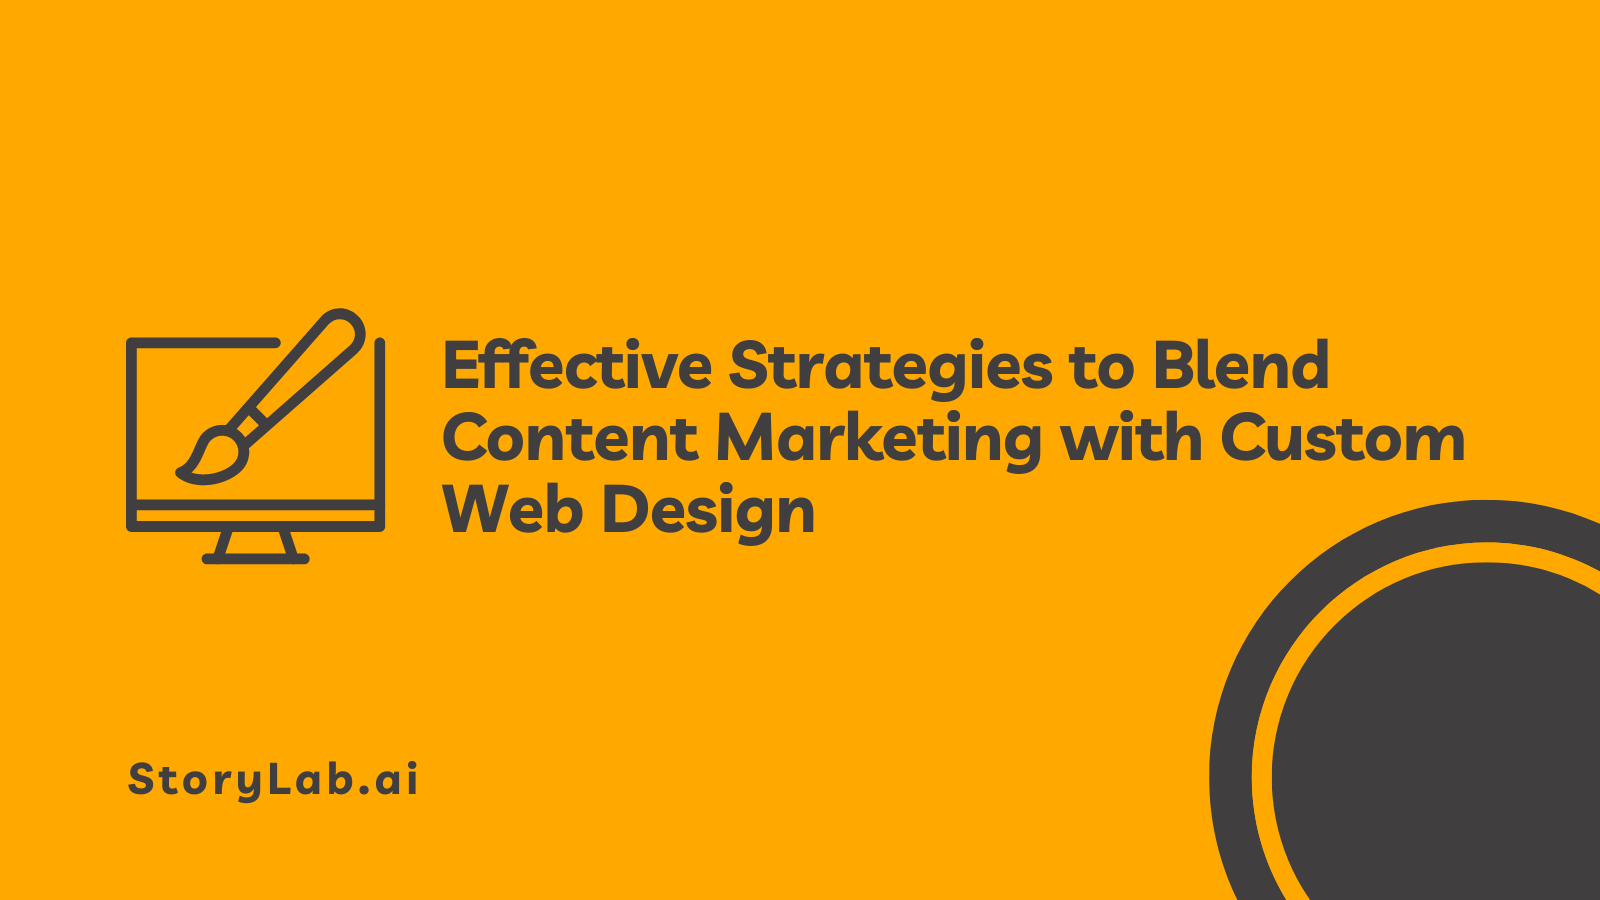 Effective Strategies to Blend Content Marketing with Custom Web Design